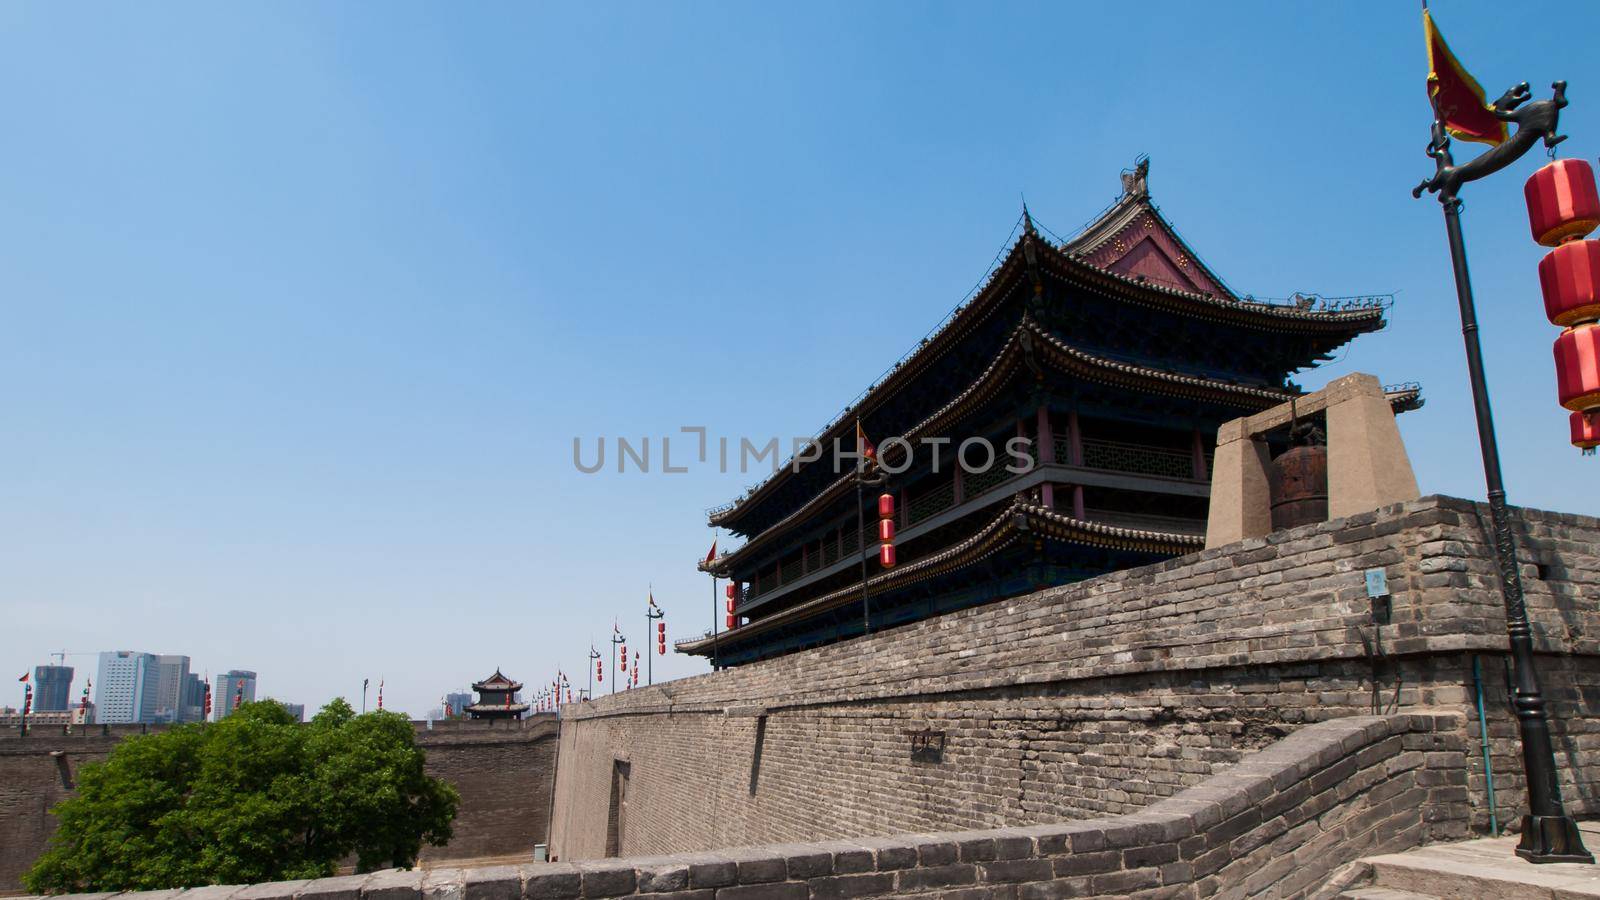 Xian ancient city wall with pagodas.